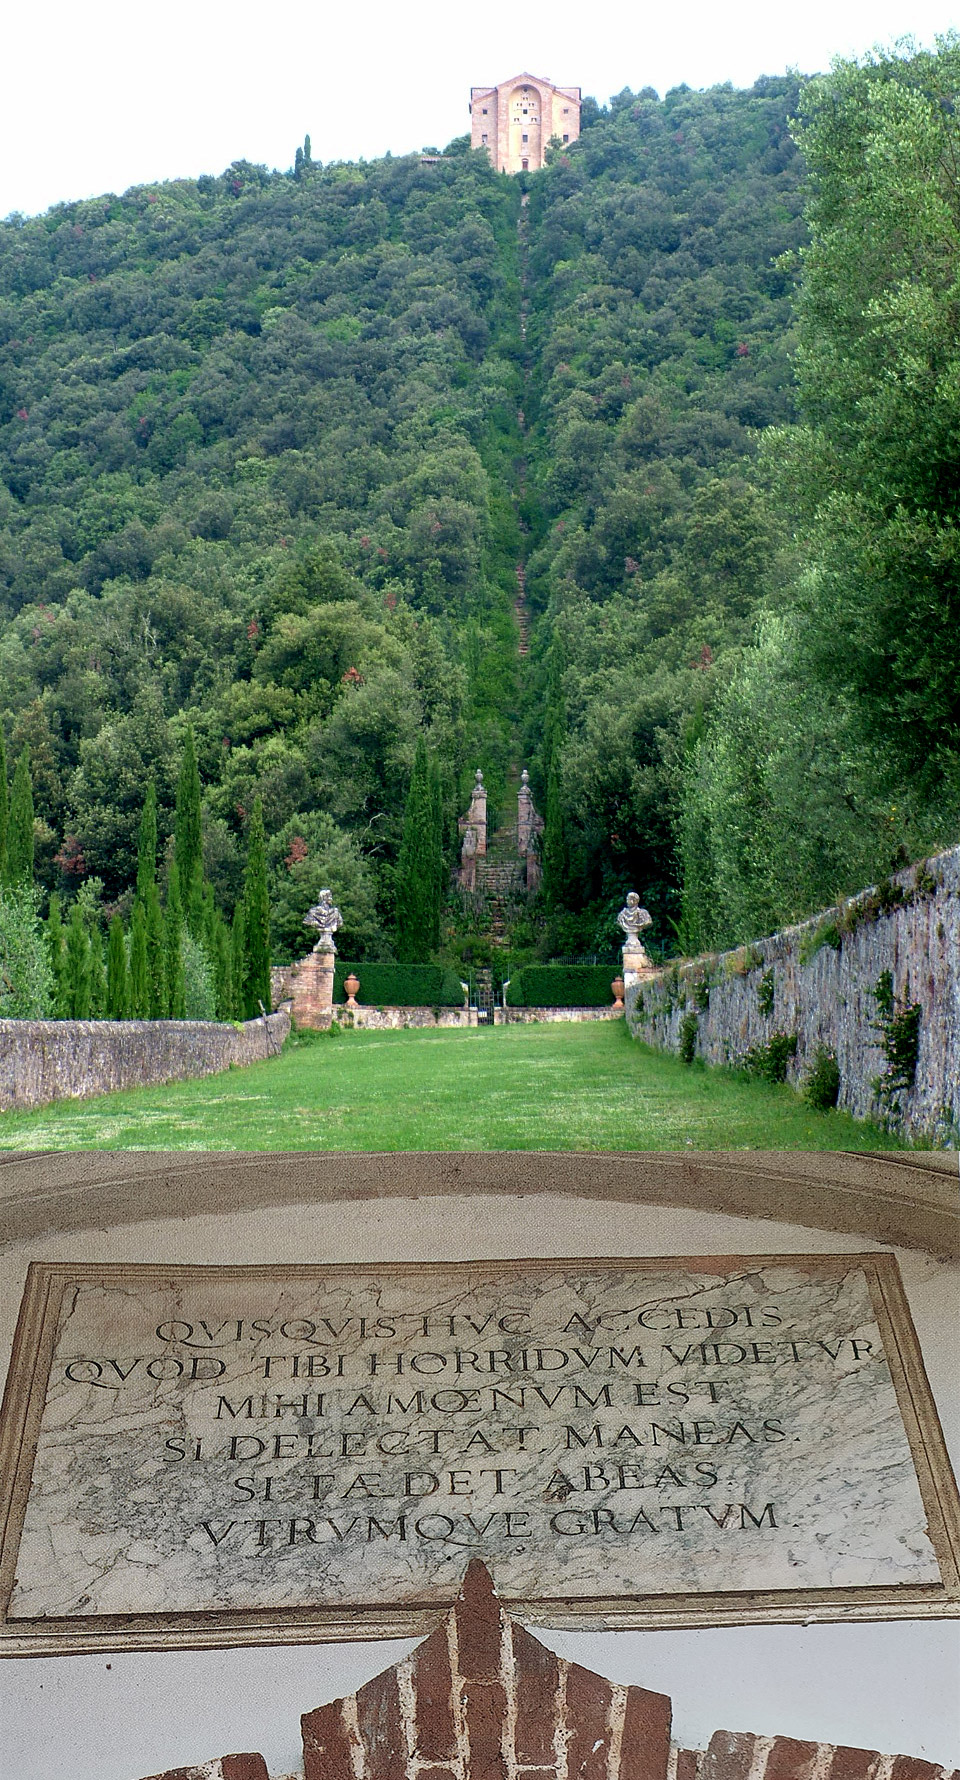 Plaque welcoming visitors to the Villa Cetinale